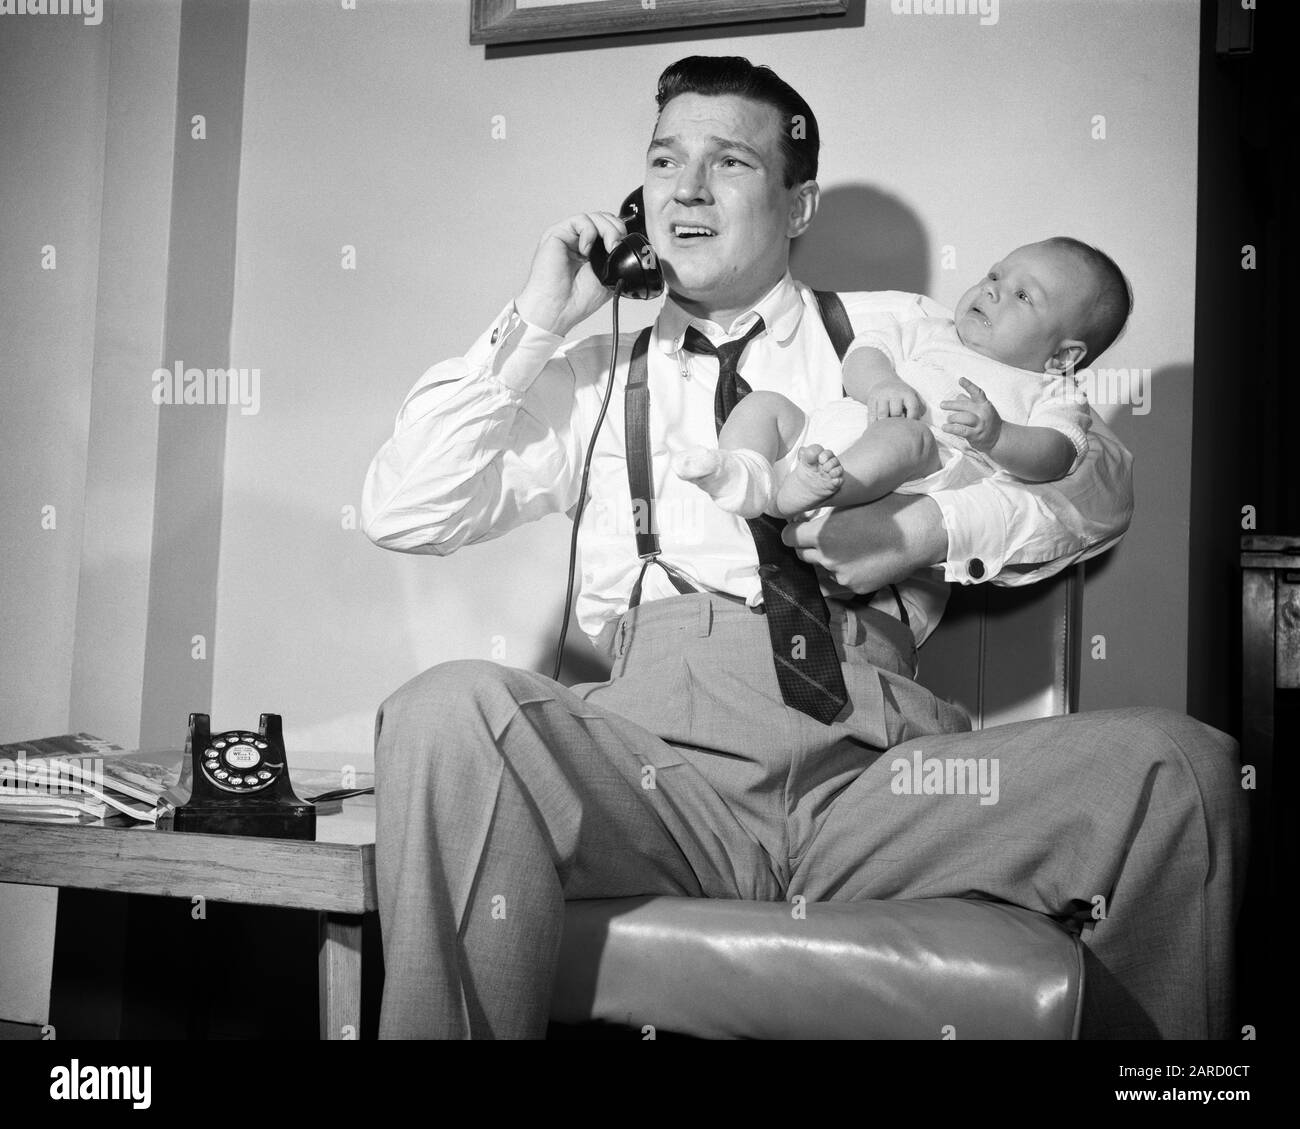 1950s DISTRESSED FATHER HOLDING BABY WHILE TALKING ON TELEPHONE - b807 DEB001 HARS PAIR SUBURBAN URBAN EMERGENCY RELATIONSHIP OLD TIME BUSY NOSTALGIA OLD FASHION 1 JUVENILE FEAR COMMUNICATION BALANCE TEAMWORK INFANT WORRY PANIC SONS LIFESTYLE PARENTING CALL RELATION HOME LIFE COPY SPACE FULL-LENGTH HALF-LENGTH PERSONS CARING CRY MALES AFRAID CALLING DIAPER FATHERS B&W CONCERNED SINGLE PARENT FATHERHOOD DADS EXCITEMENT STRESSFUL DIAPERS BAREFOOT CONCERN PHONES PEOPLE BABIES BUSINESS MAN TELEPHONES BOOTIE FEARFUL DEB001 BABY BOY BABY-SITTER BABY-SITTING BOOTY JUVENILES MID-ADULT MID-ADULT MAN Stock Photo